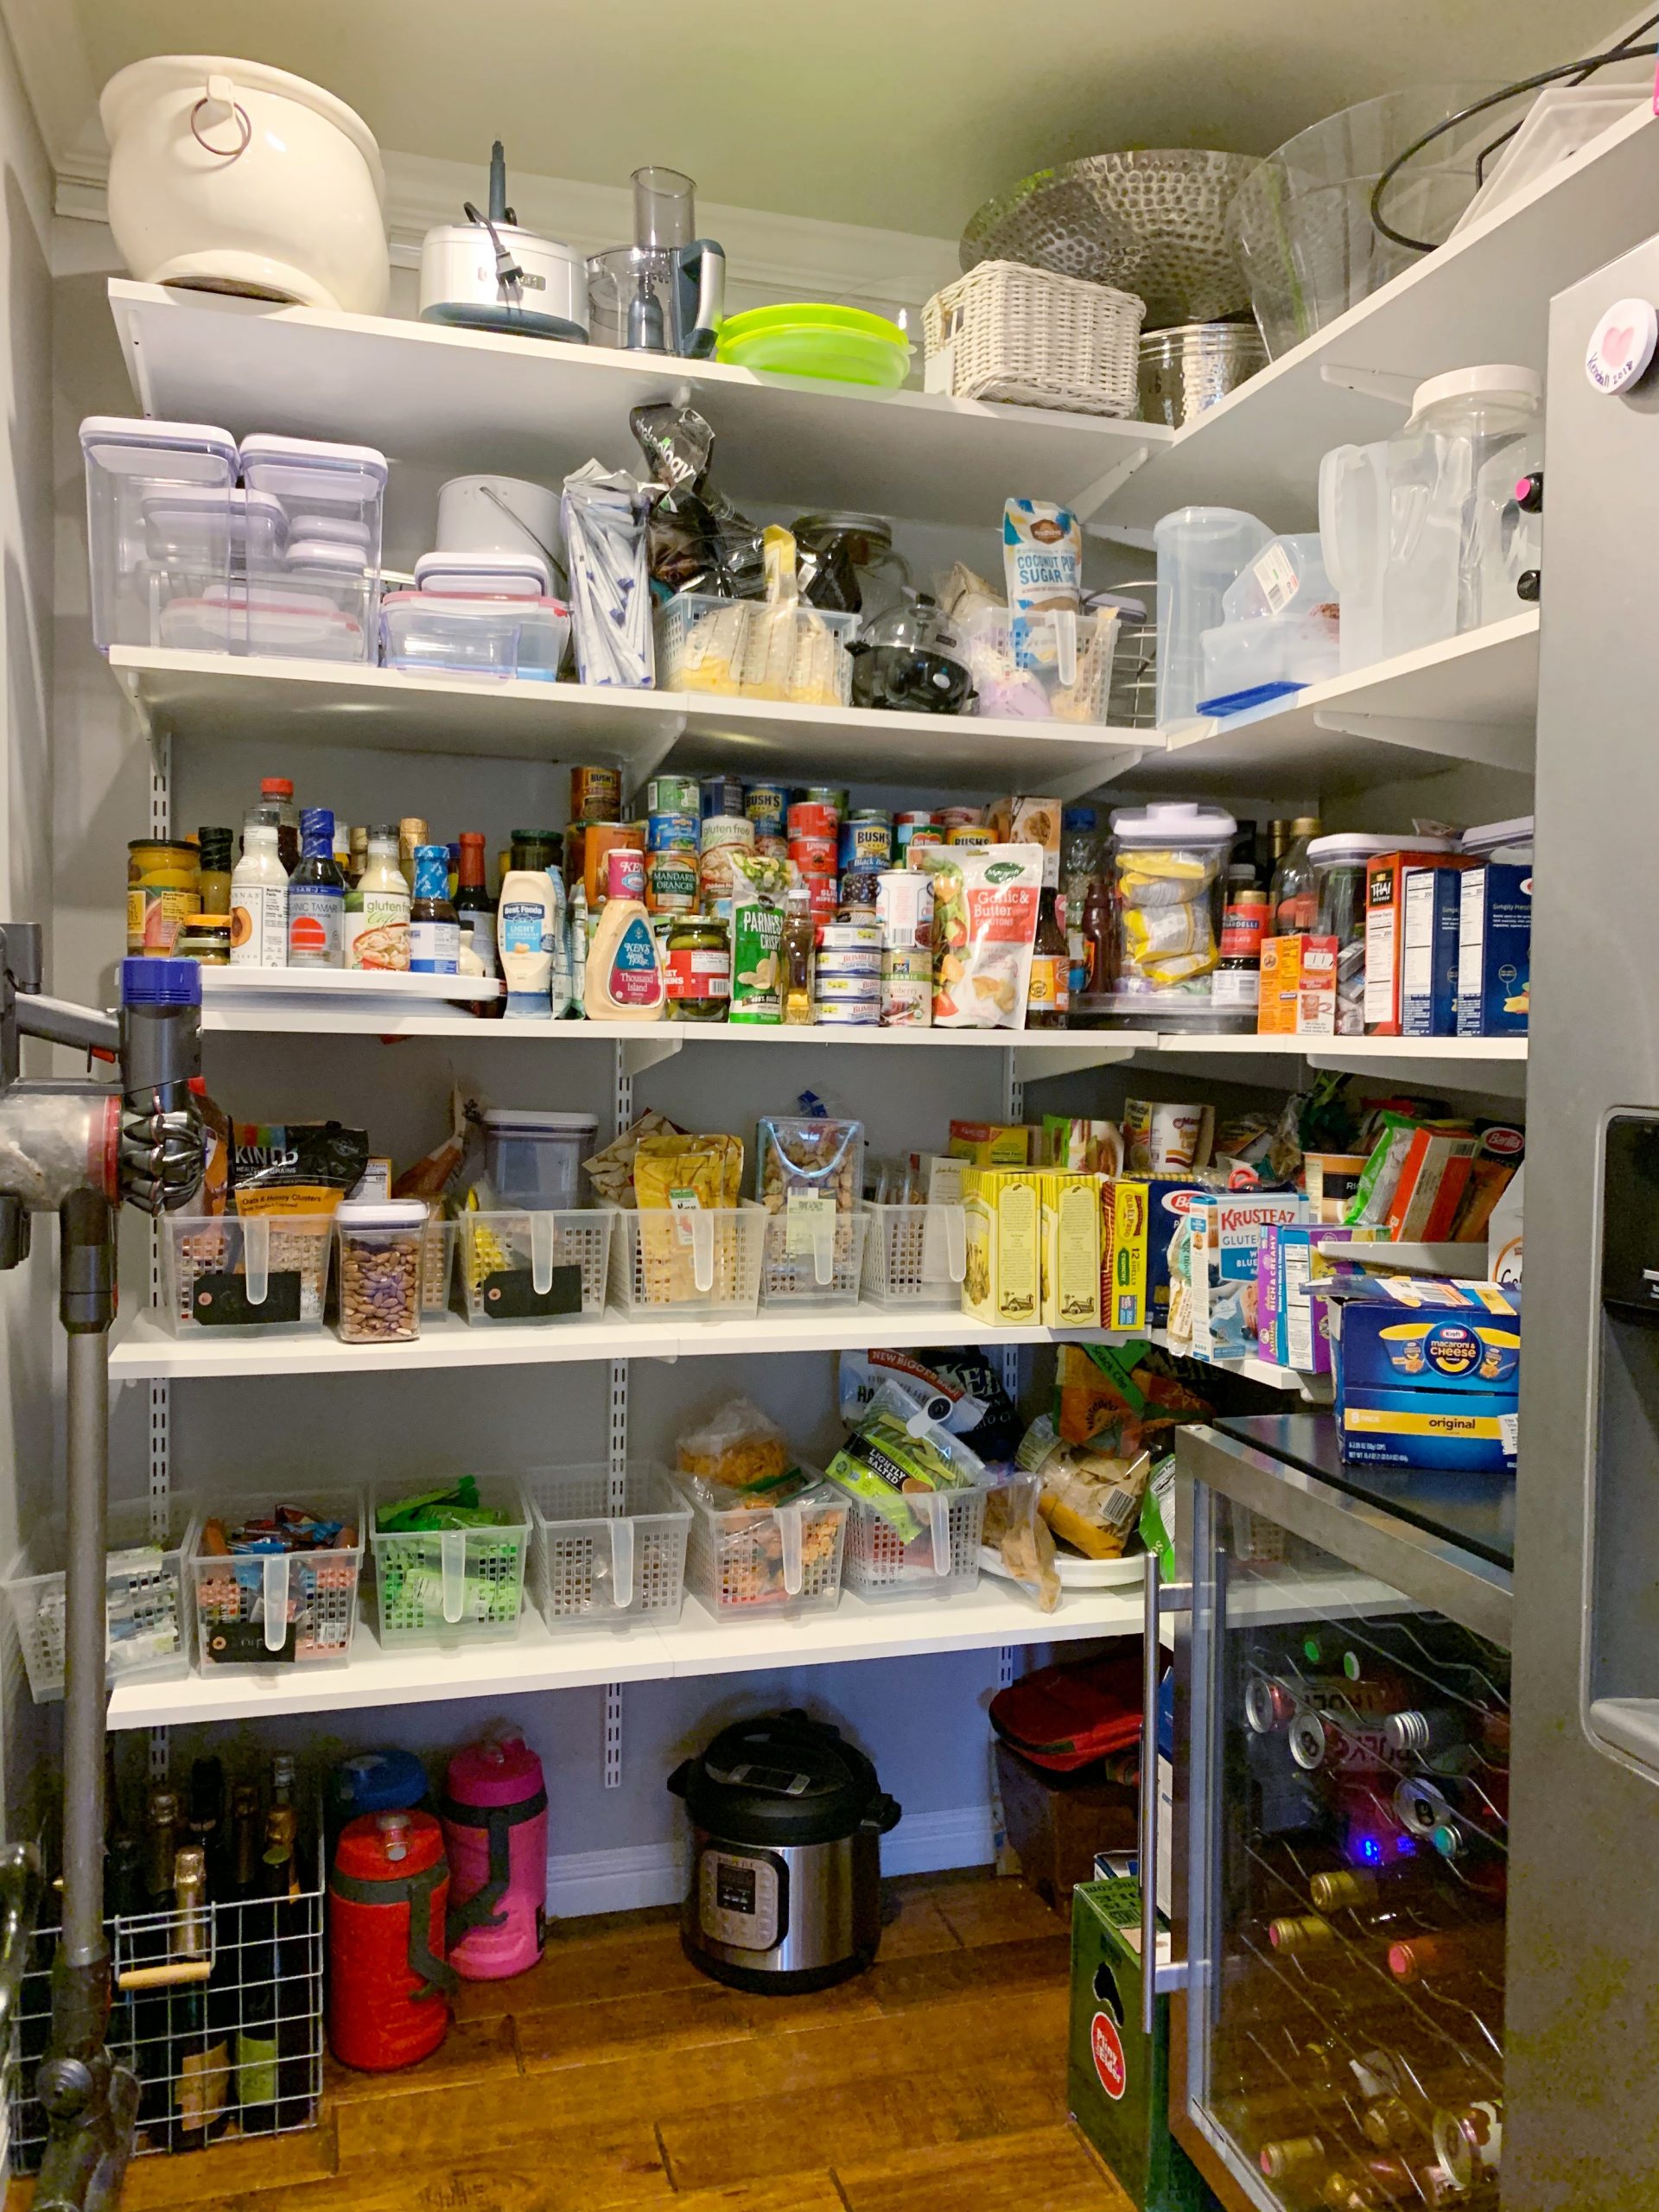 https://simplyorganized.me/wp-content/uploads/2020/01/cluttered-pantry-before-scaled.jpg